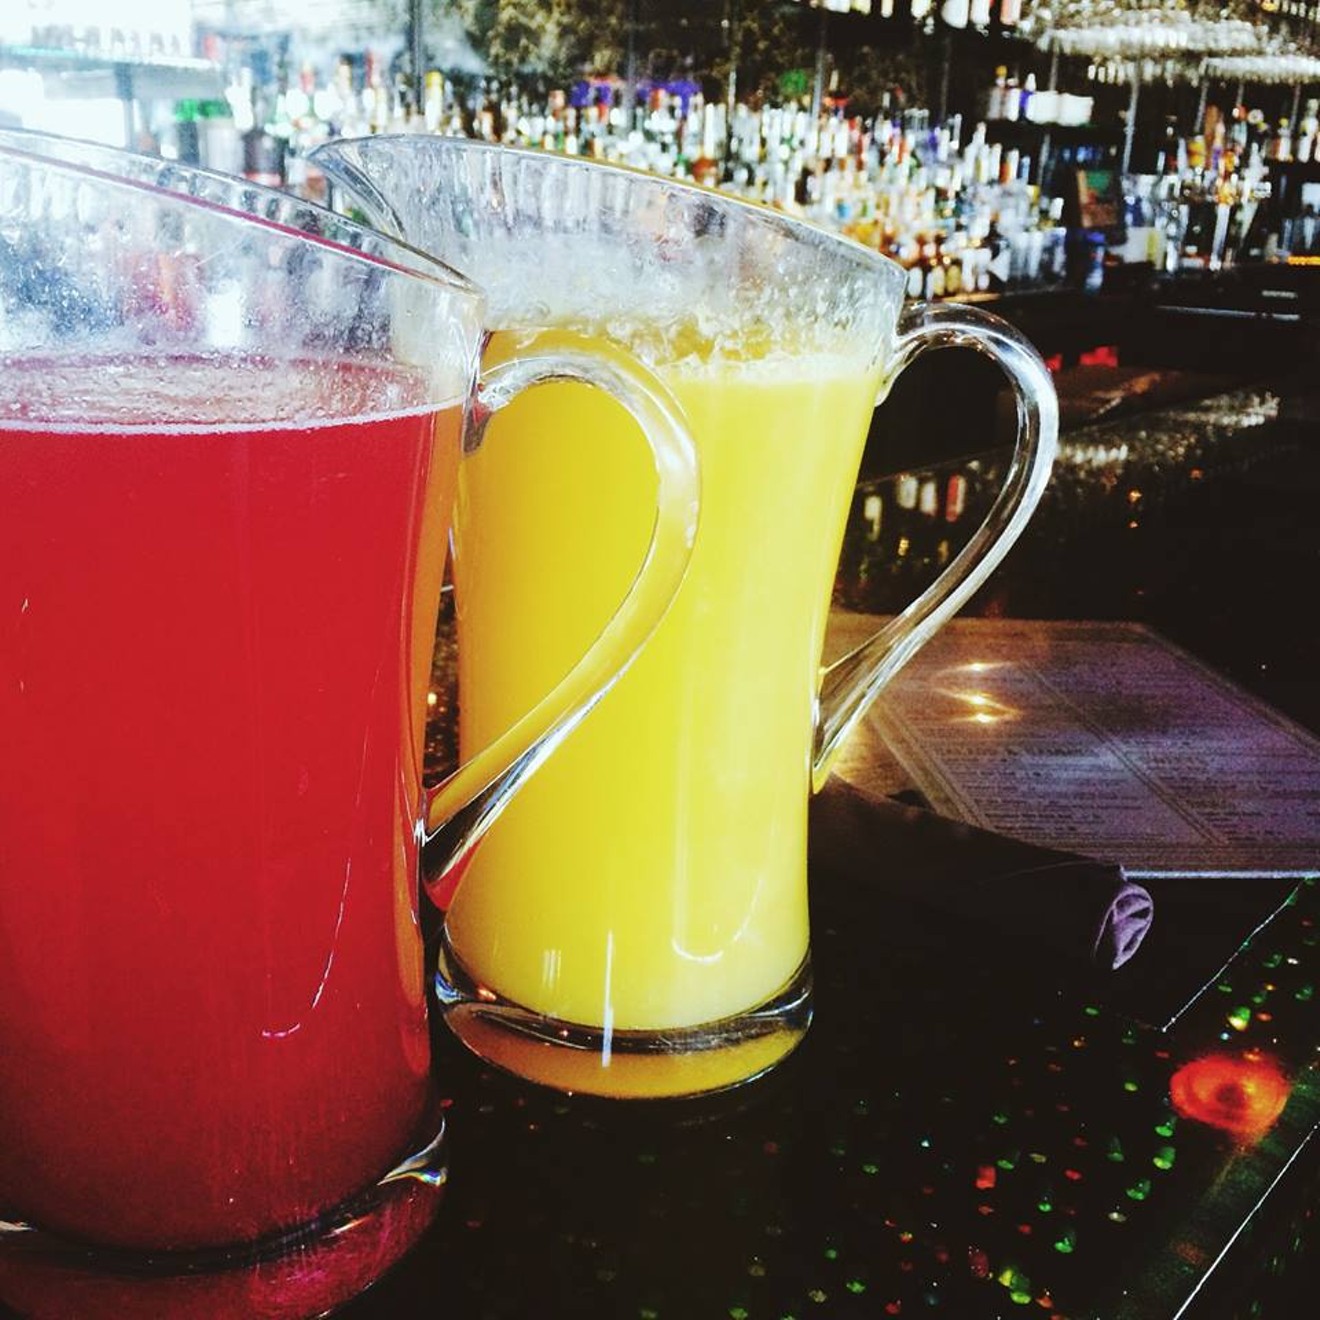 We are making Mimosa Mondays a Must! Check out this Mimosa Tower